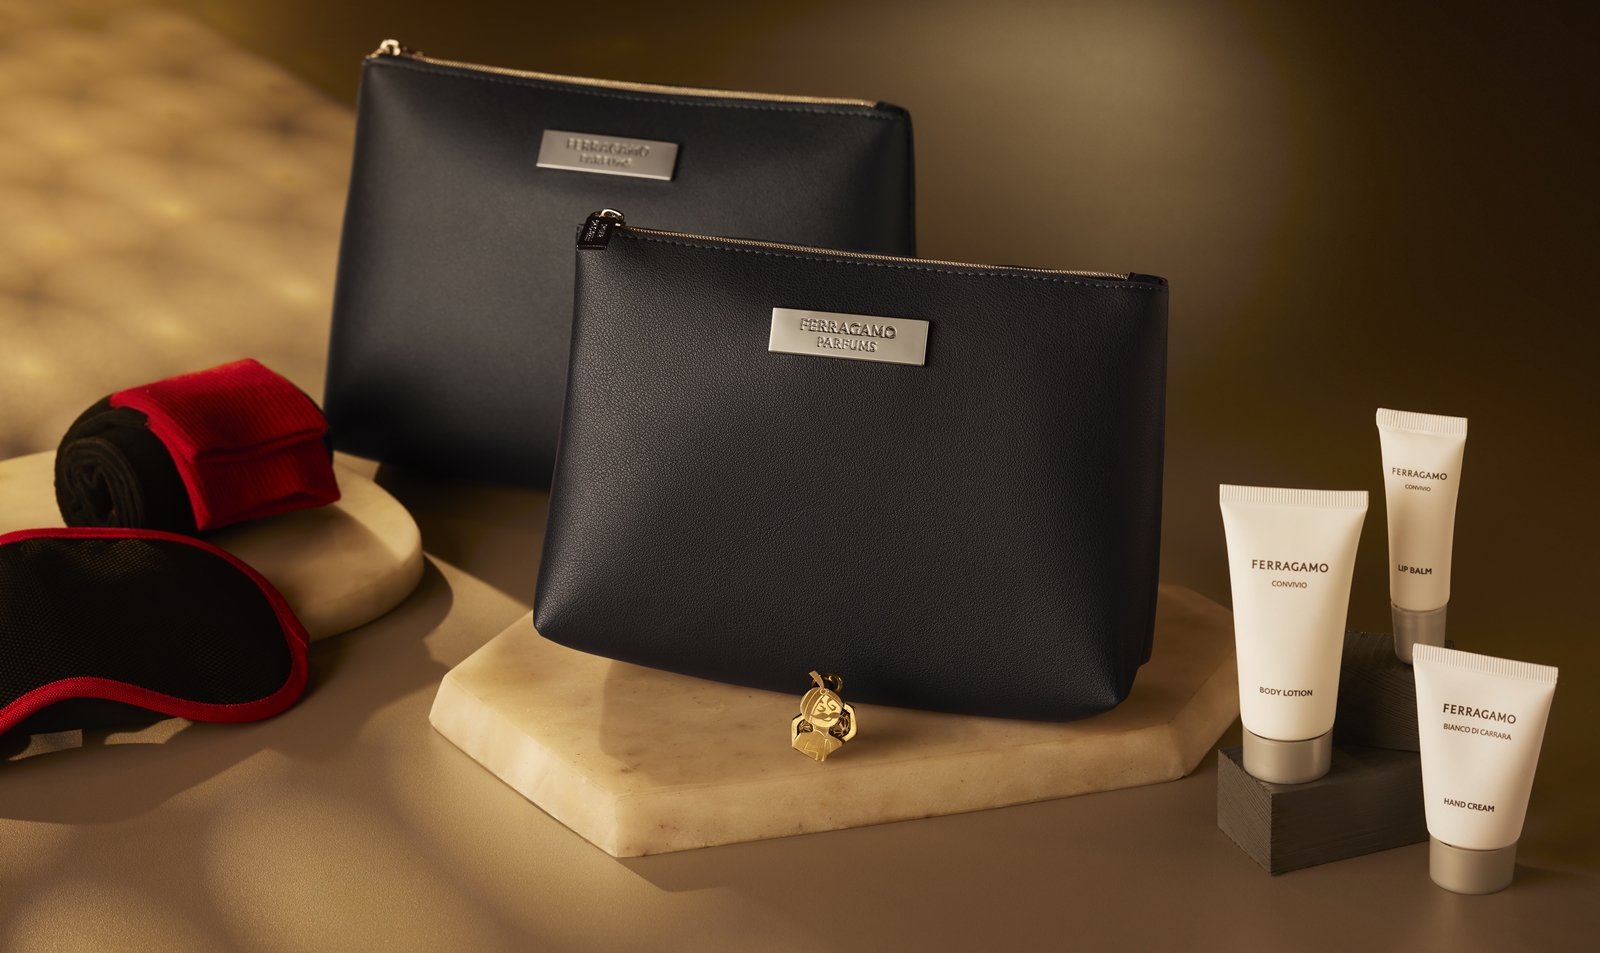 Business class seats also come with amenity kits by Italian luxury fashion house Ferragamo.